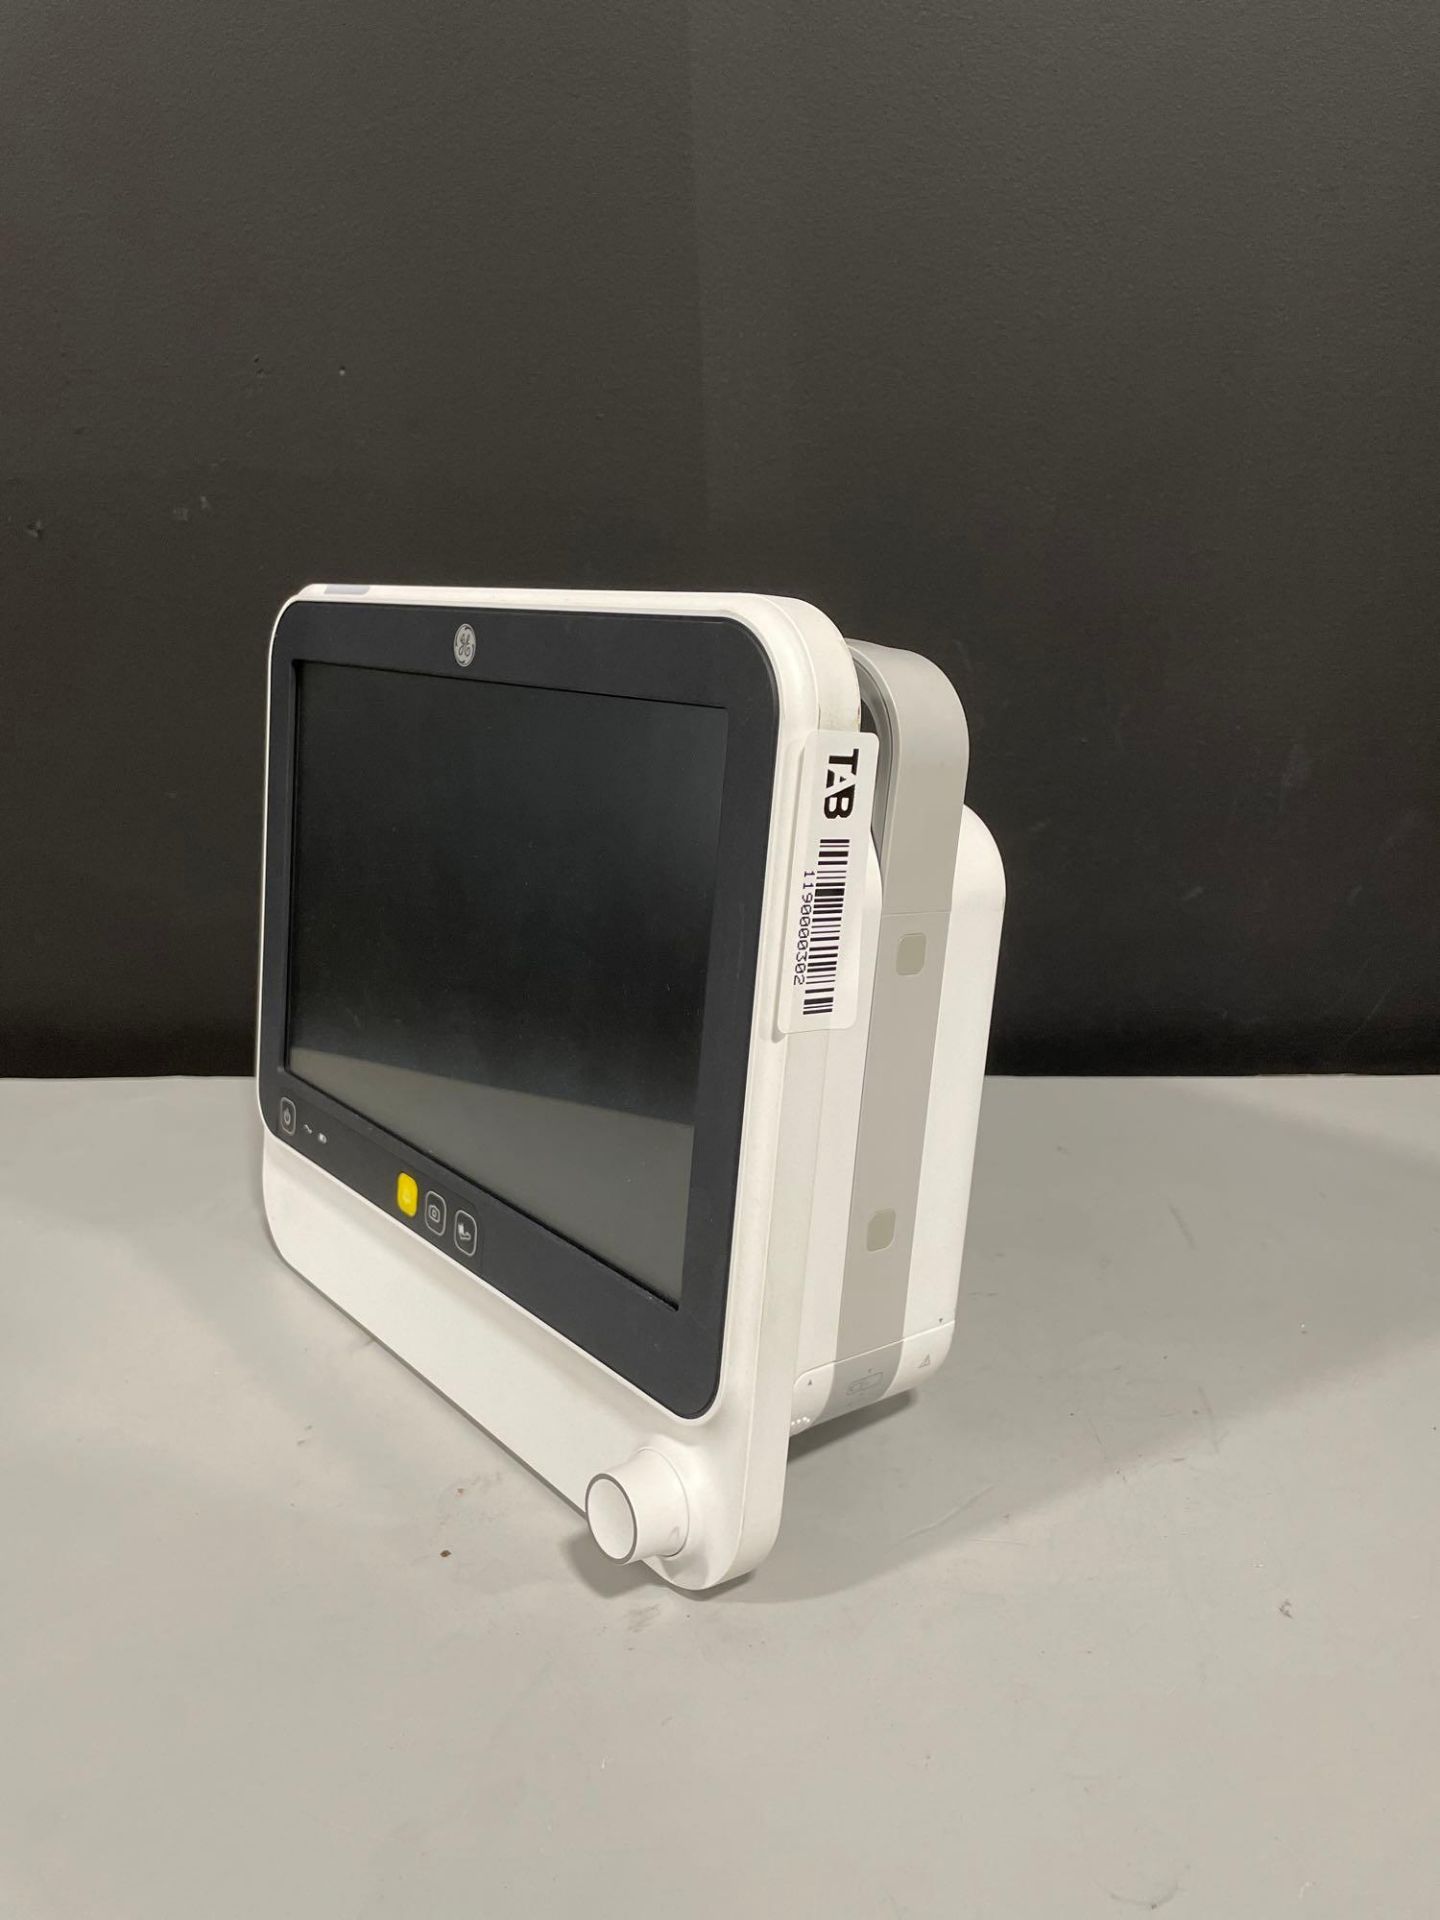 GE B125 PATIENT MONITOR - Image 2 of 4